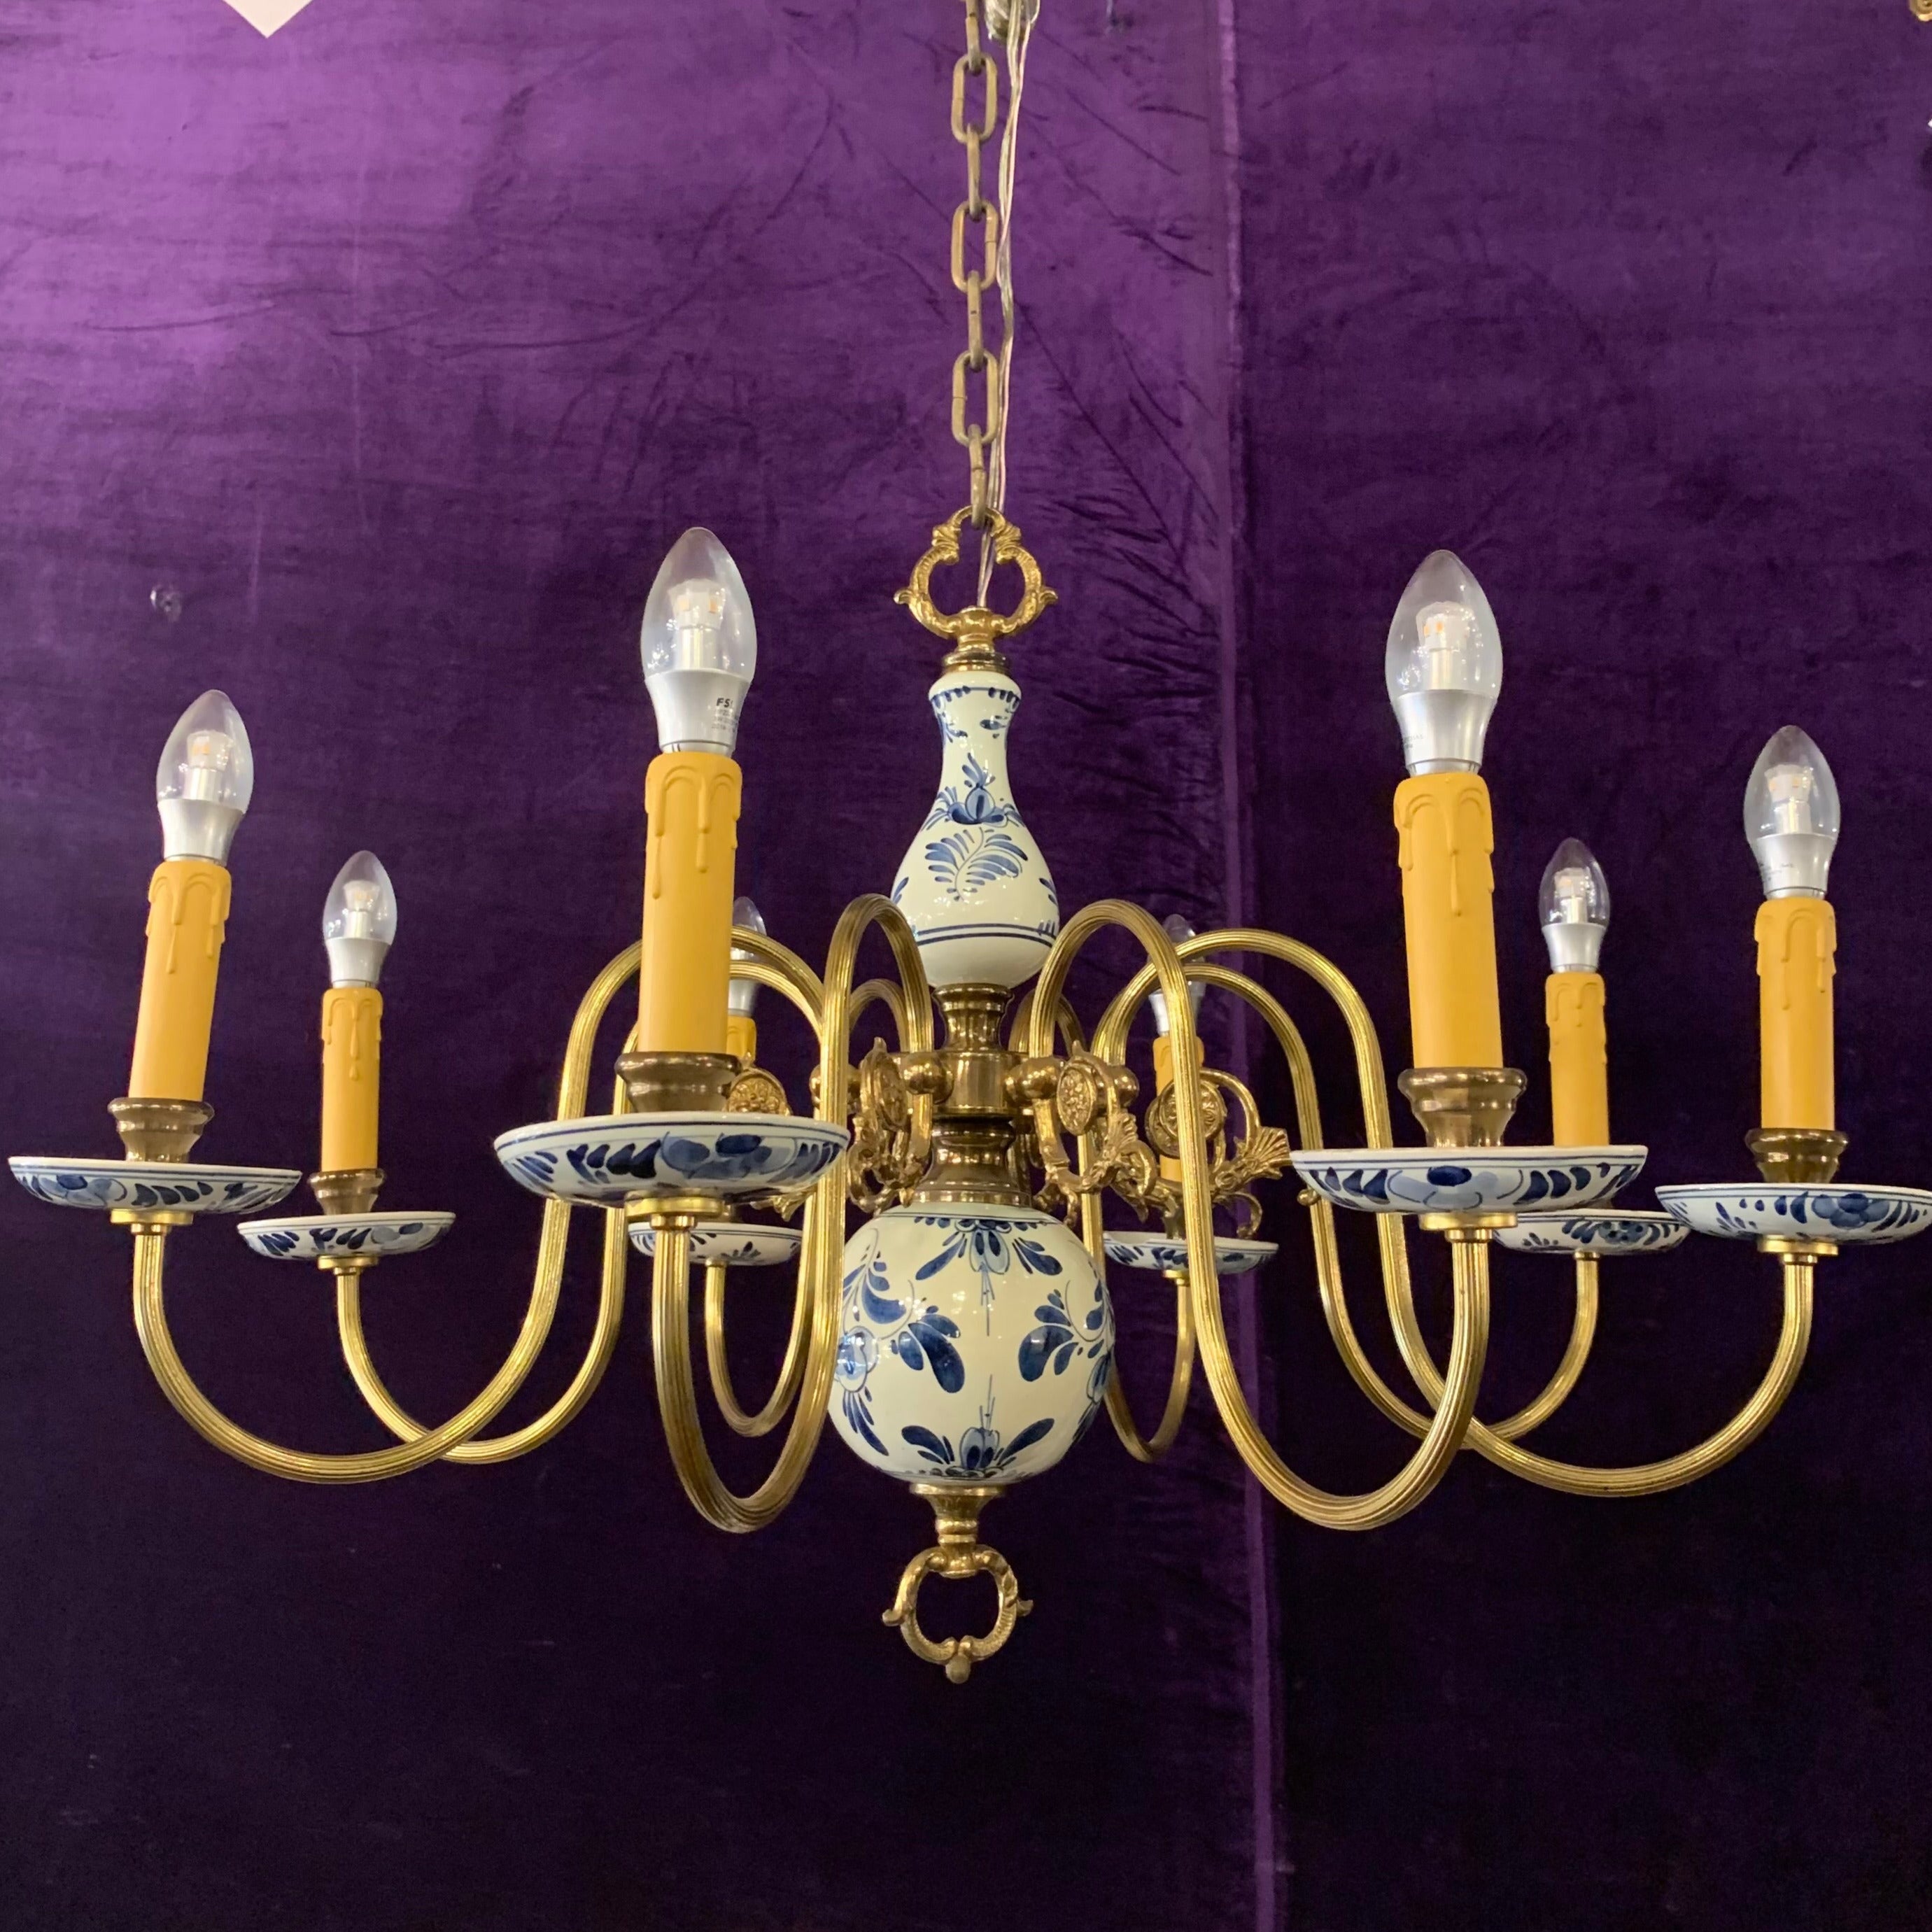 Delft Porcelain Chandelier with Hand Painted Detail